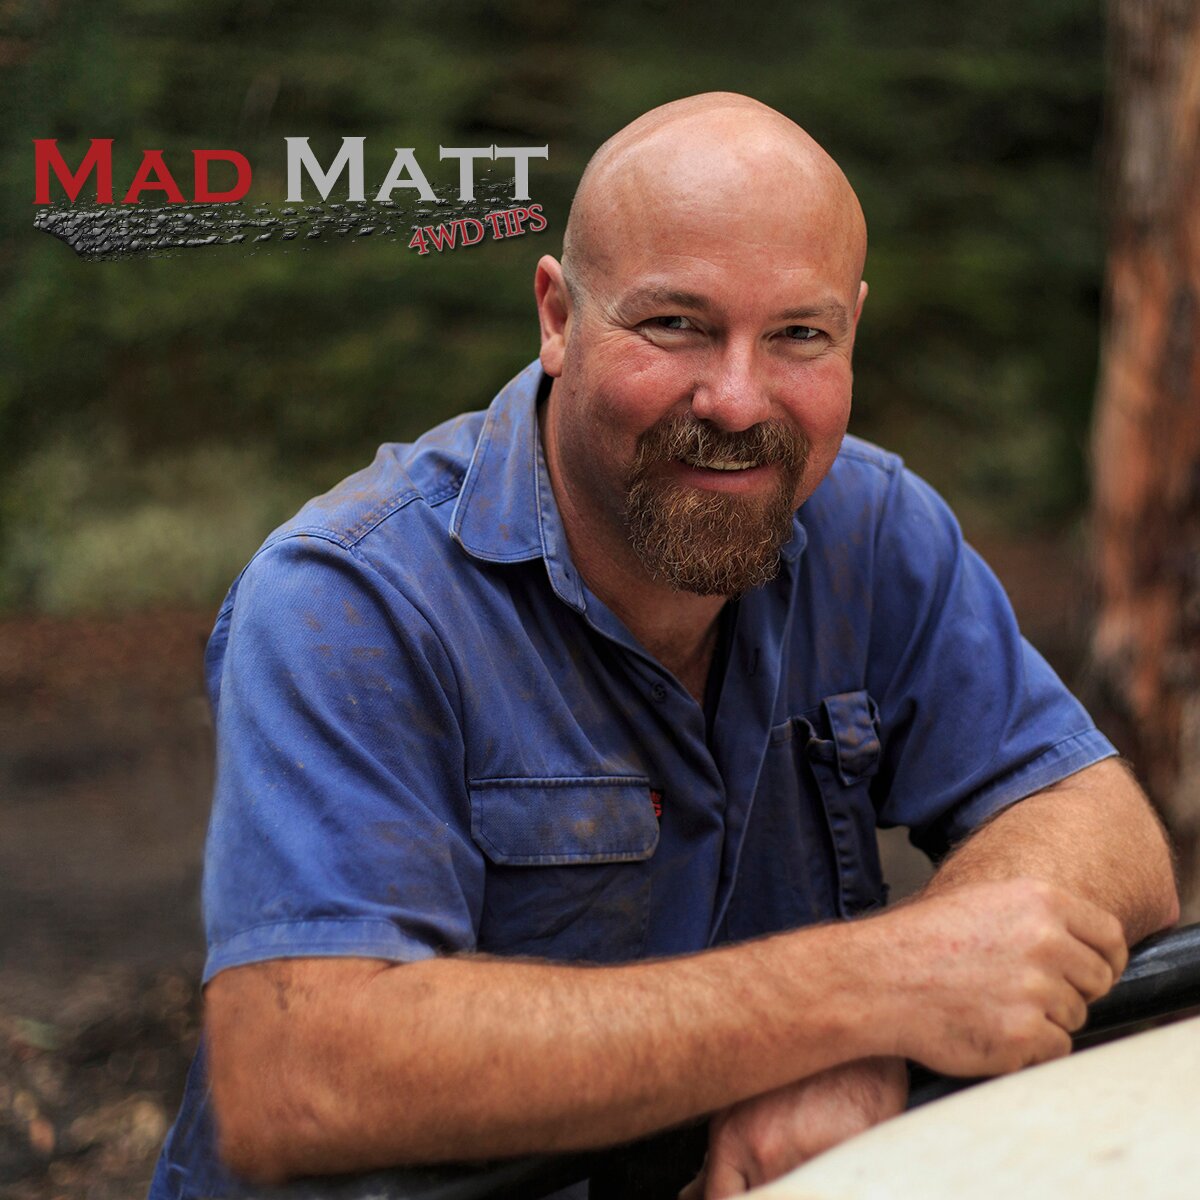 G'day, I'm Mad Matt!
I am here to provide you with some 4wdriving tips keeping you entertained along the way.
http://t.co/kSE2gR47cC